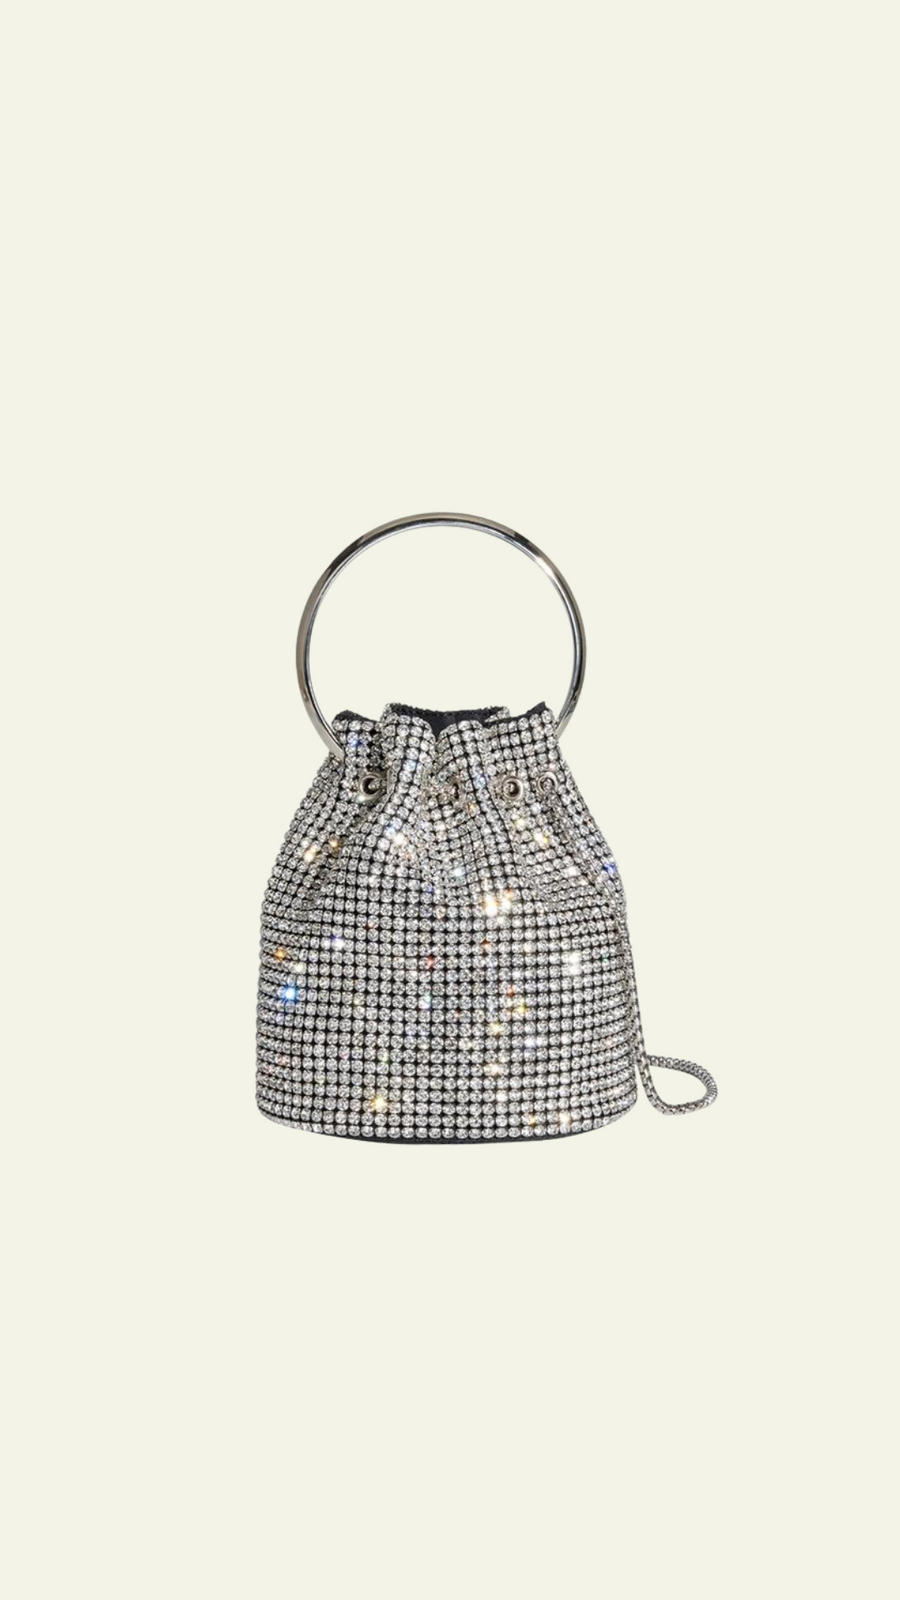 Kasee Small Crystal Top Handle Bag in Silver